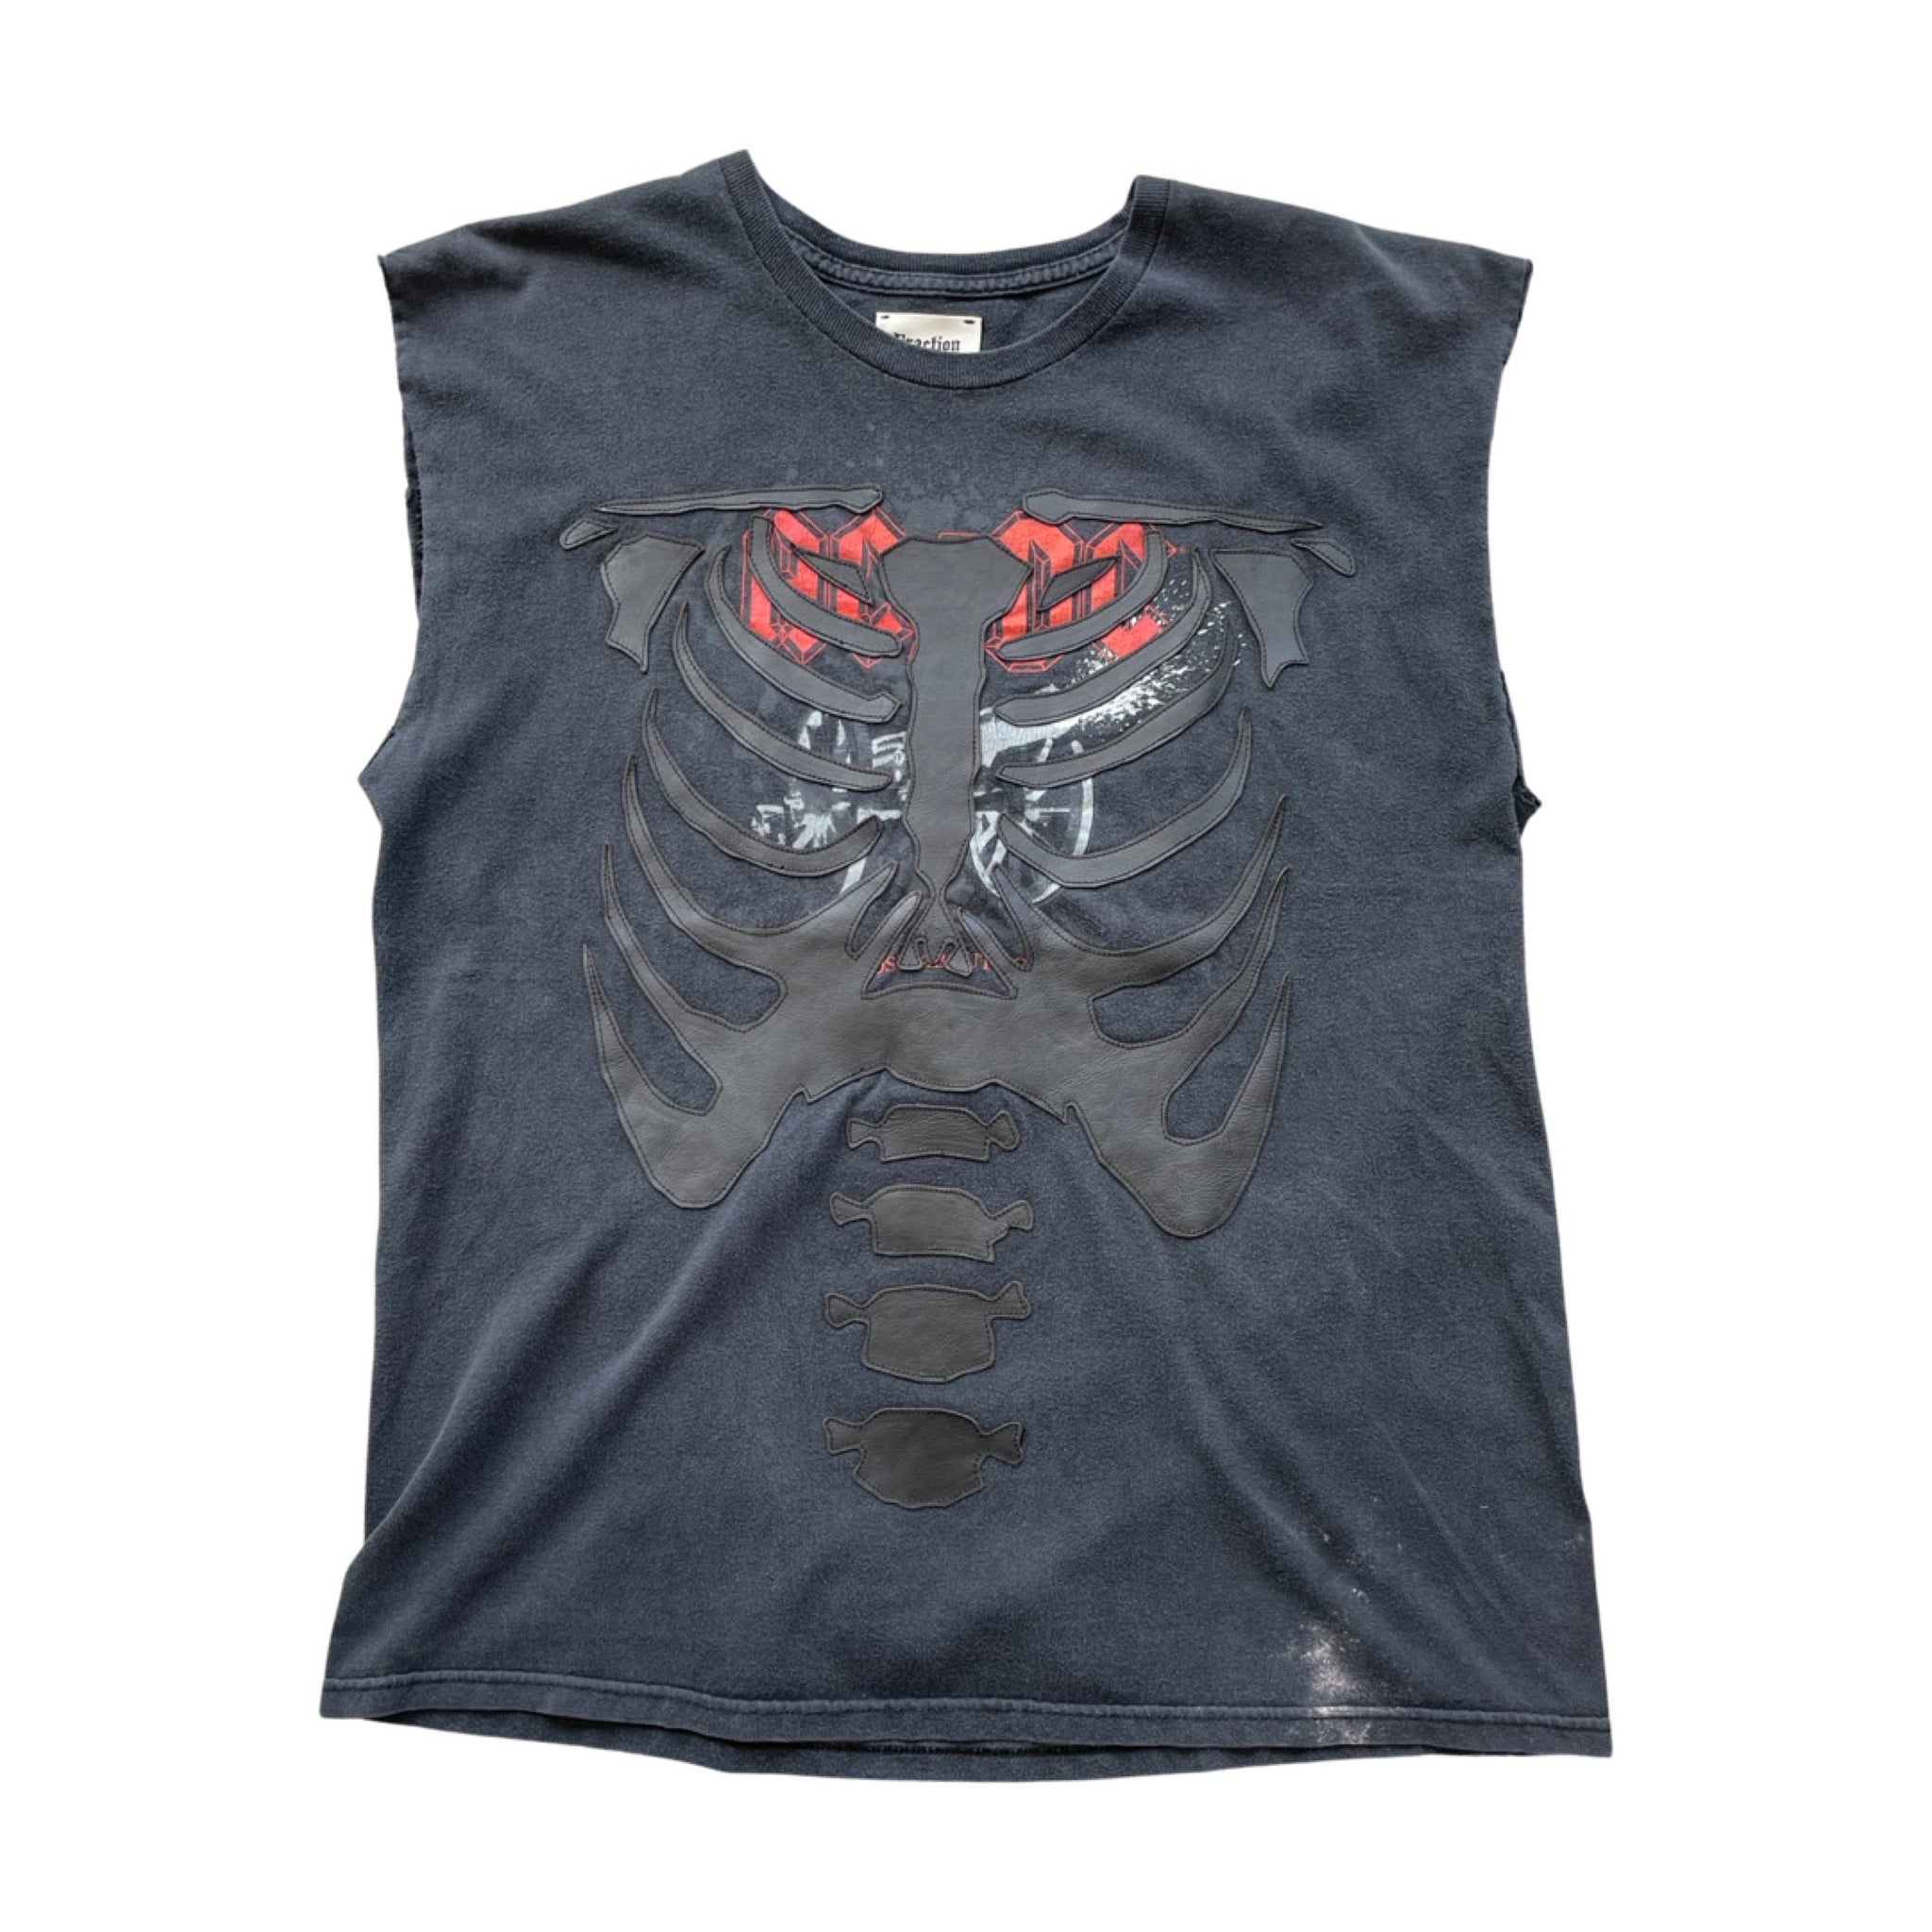 ACDC T-shirt with Leather Ribcage Appliqué